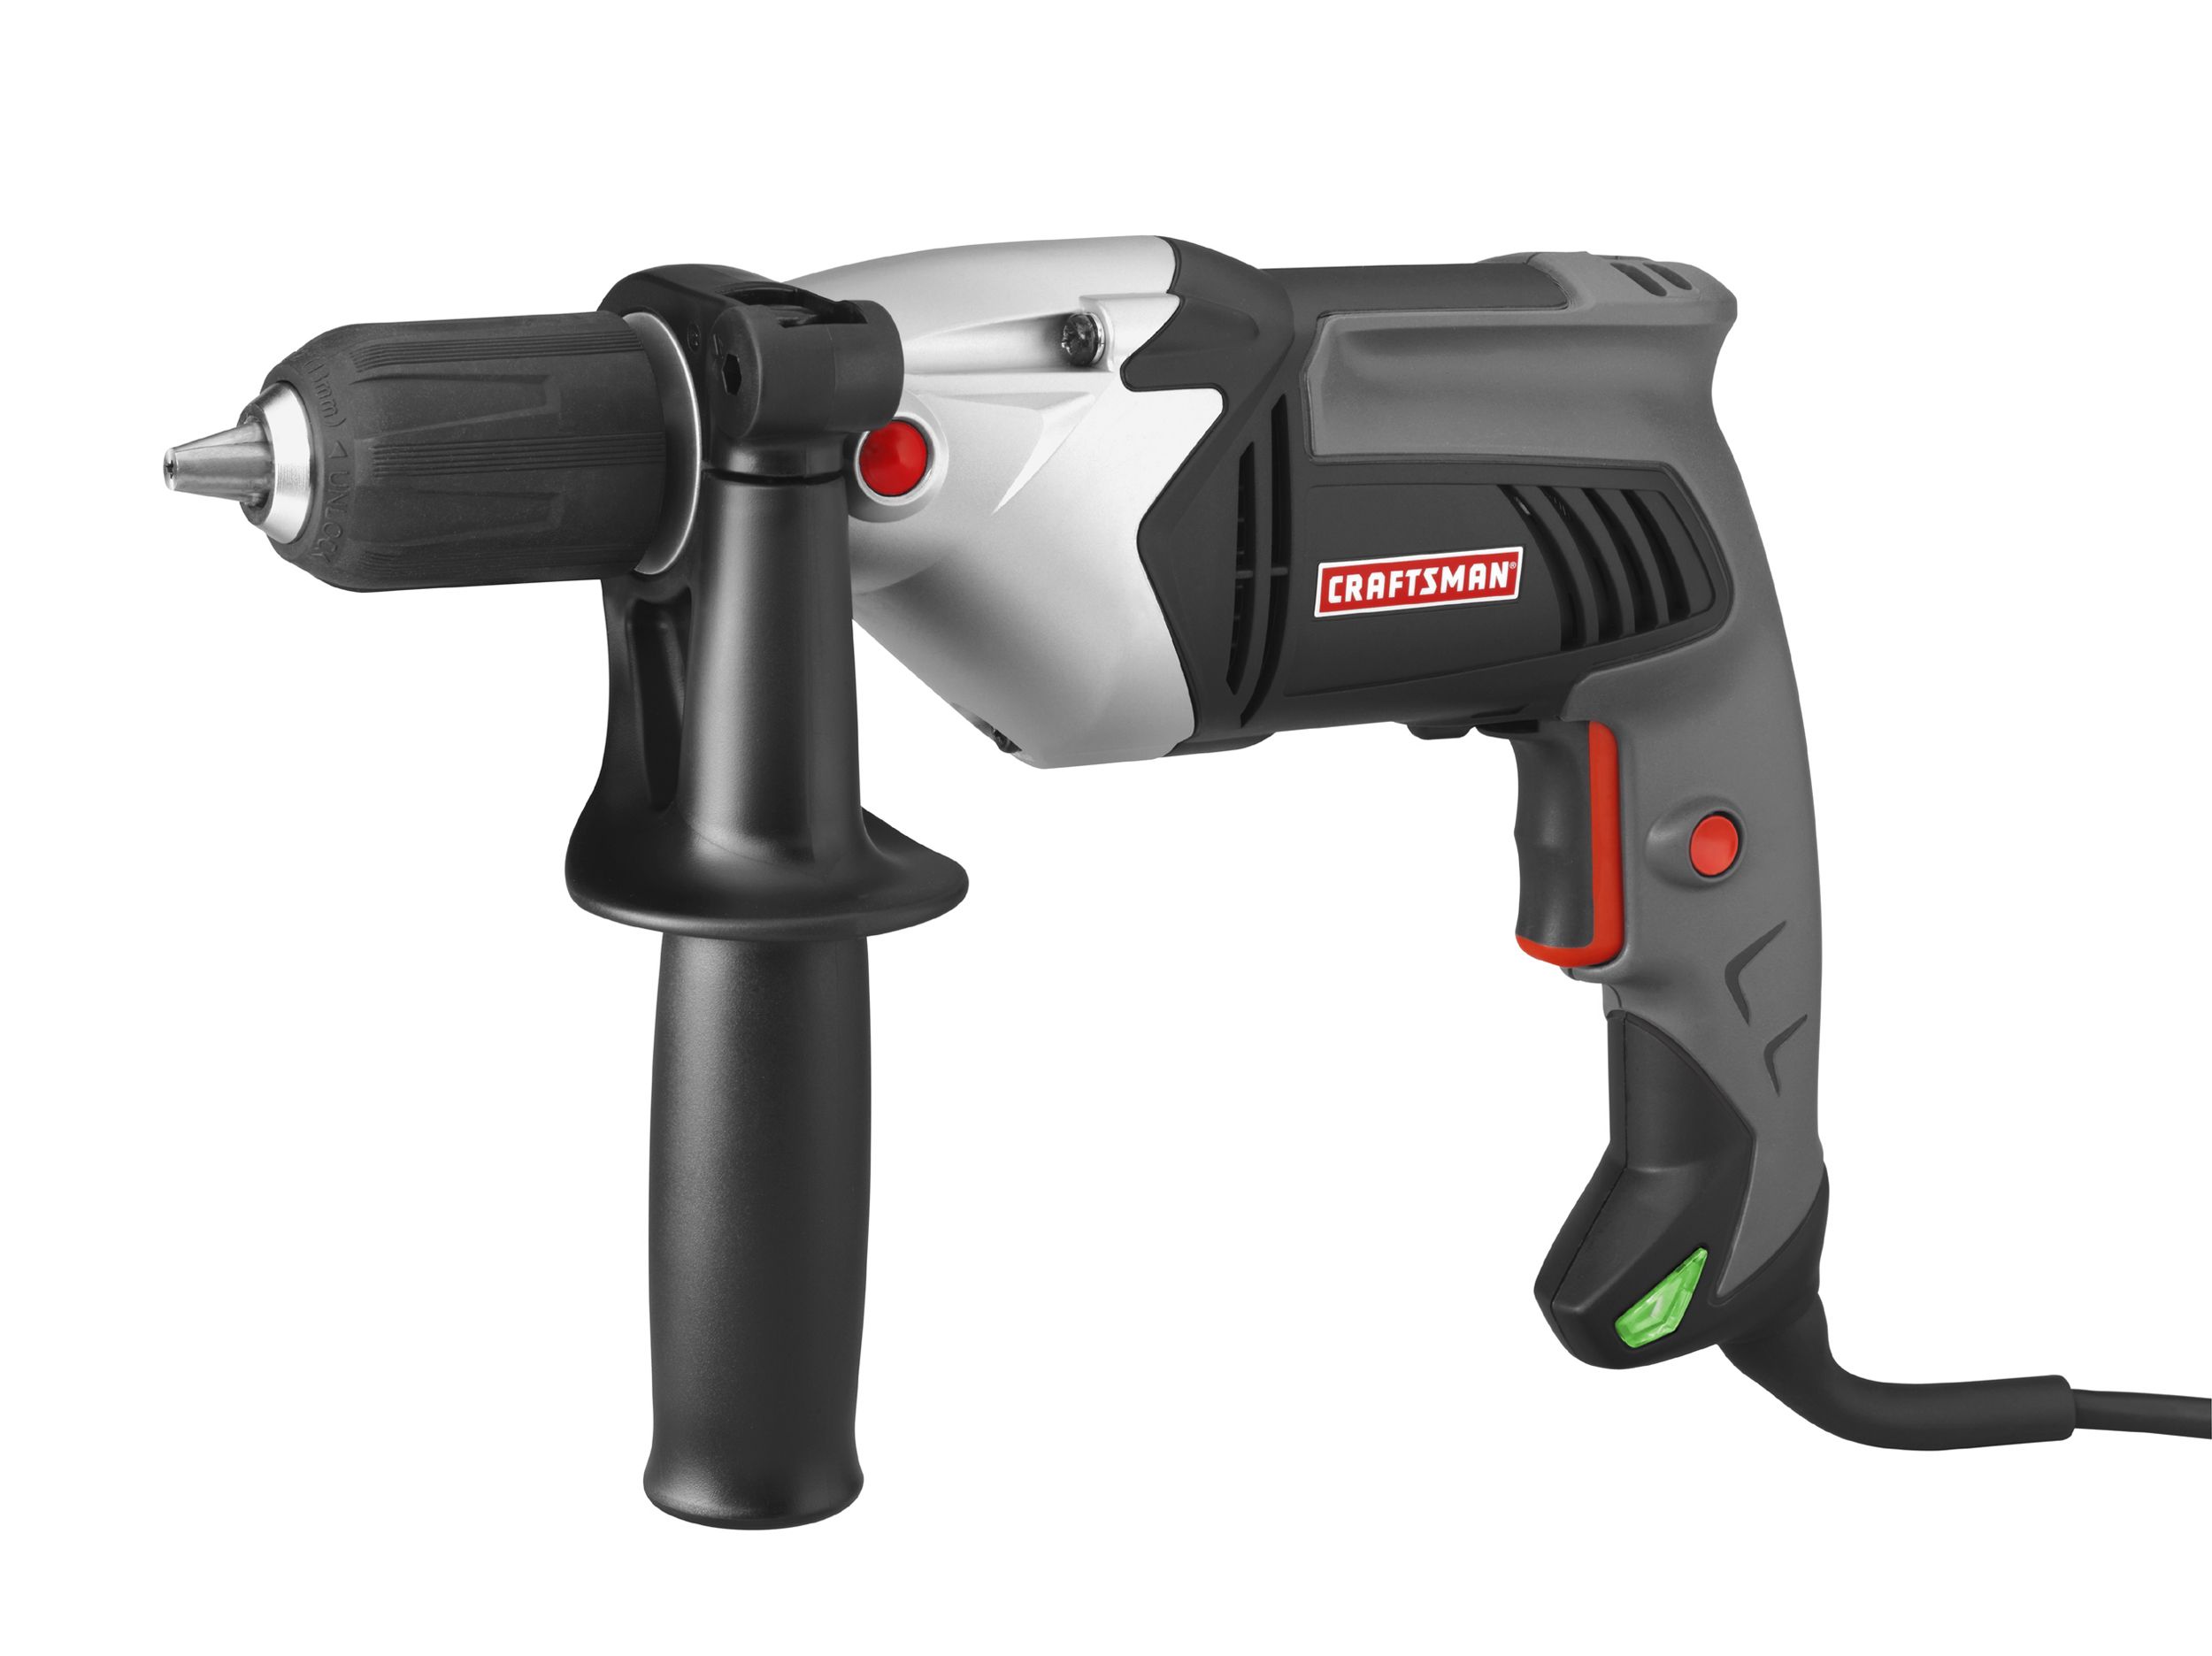 Craftsman - 10116 - 1/2 in. Corded Drill | Sears Outlet